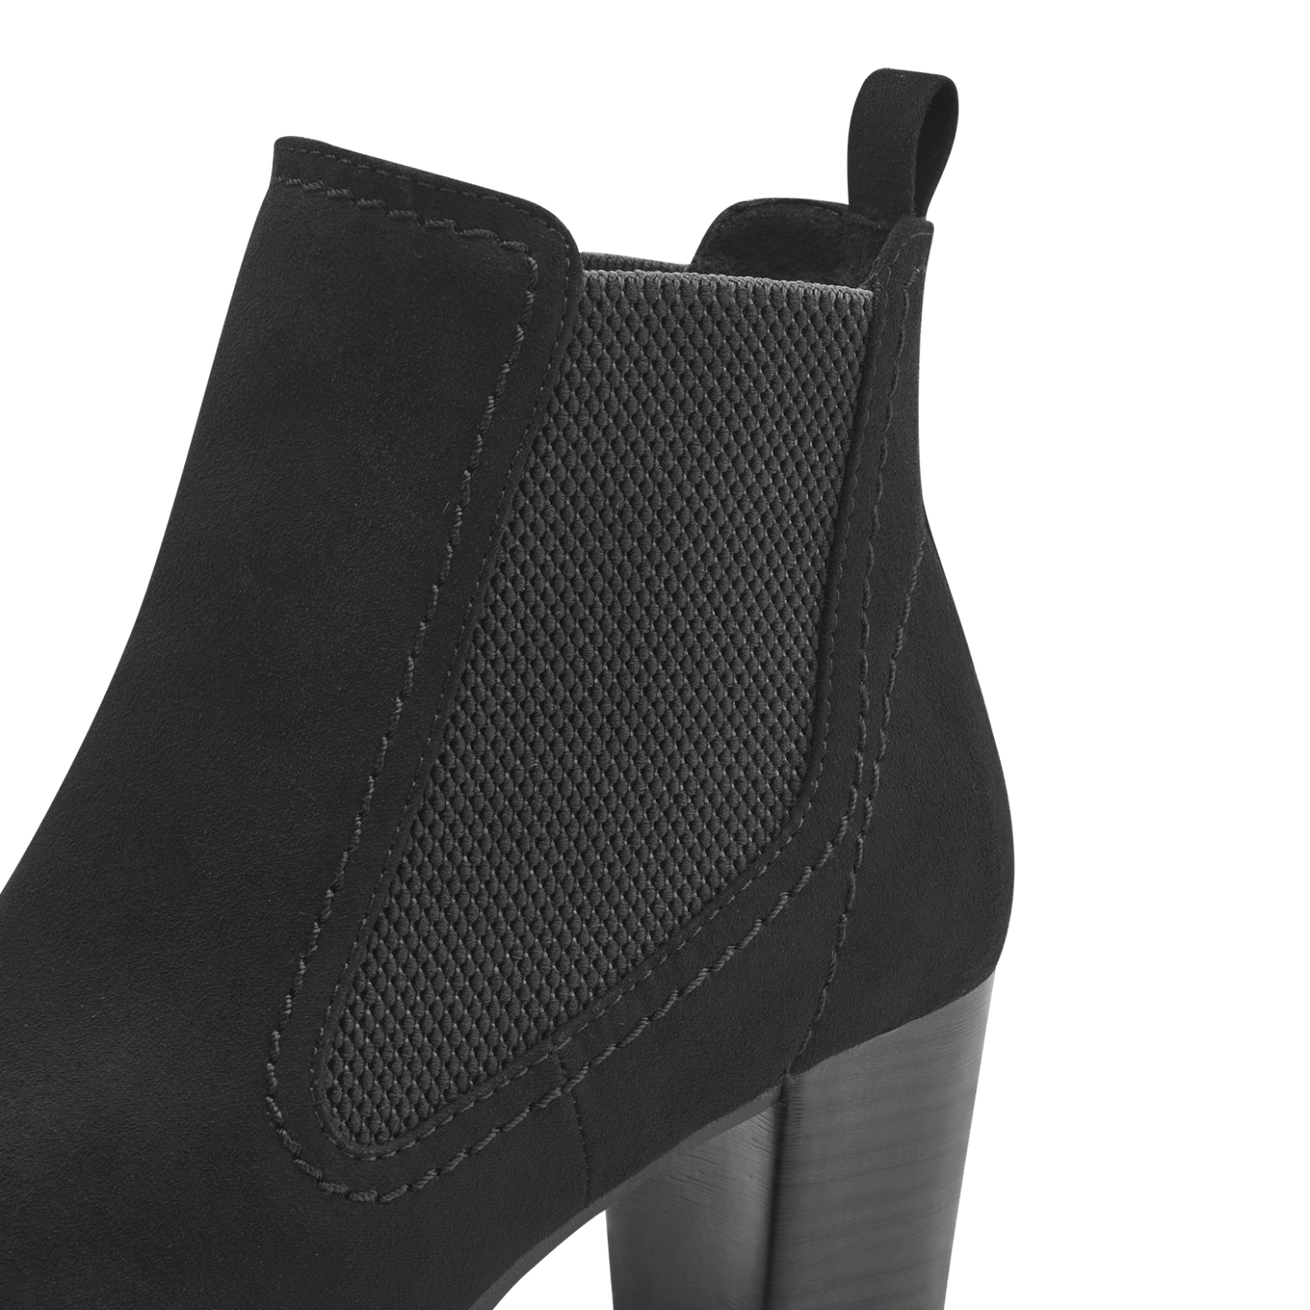 Close-up of the boot's side panel and heel.